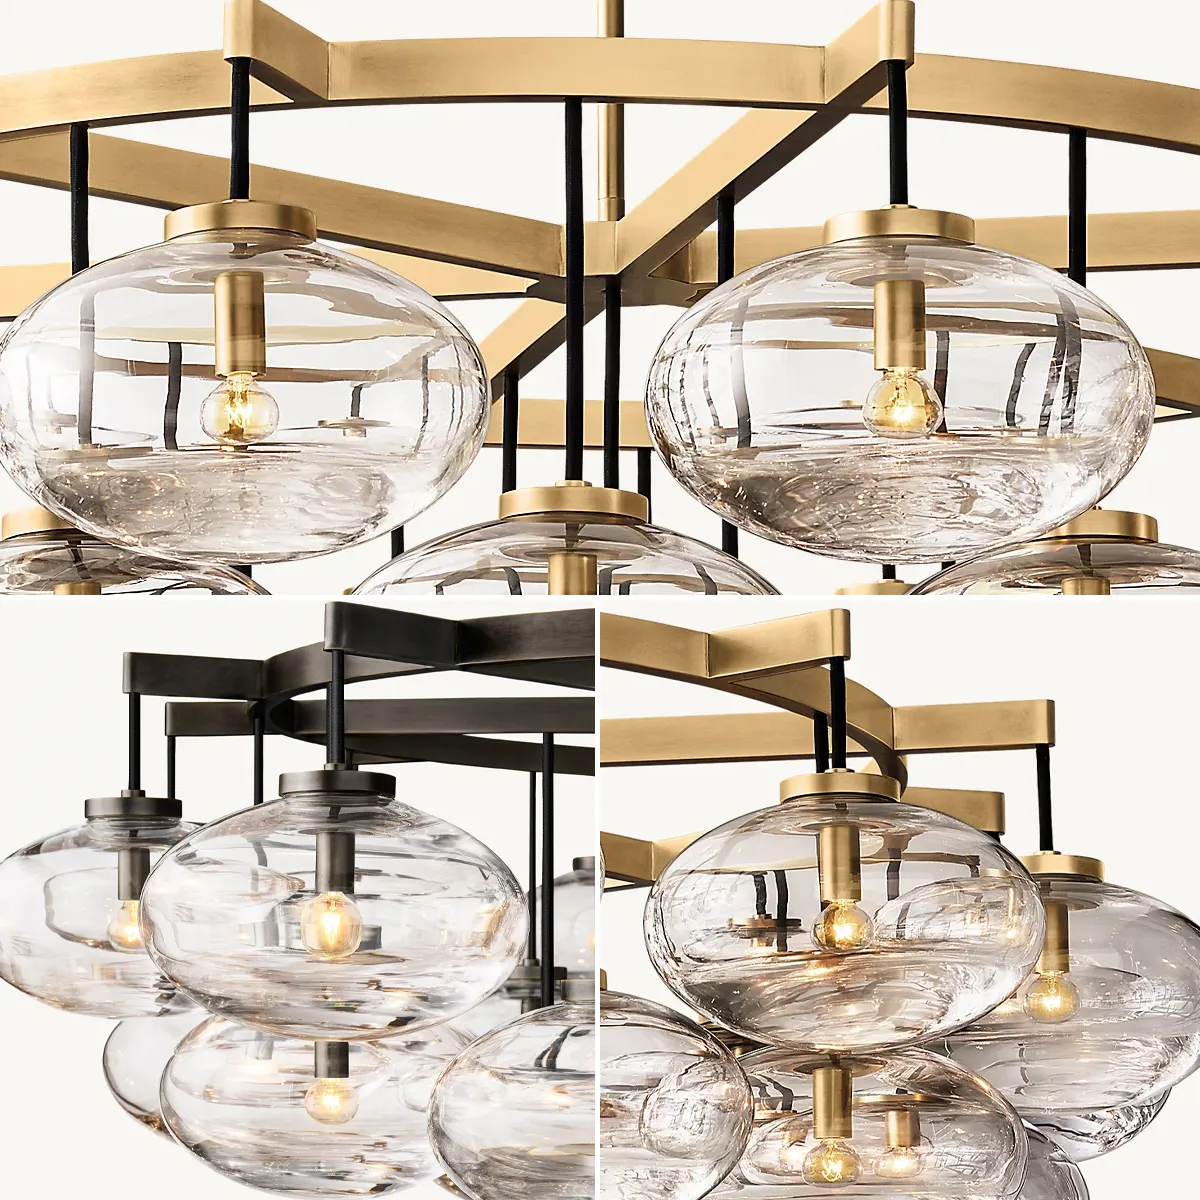 Industrial Style Oval Glass Ball Lampshade Chandelier Ceiling Light Fixture For Living Dining Room Bedroom Kitchen Island Foyer